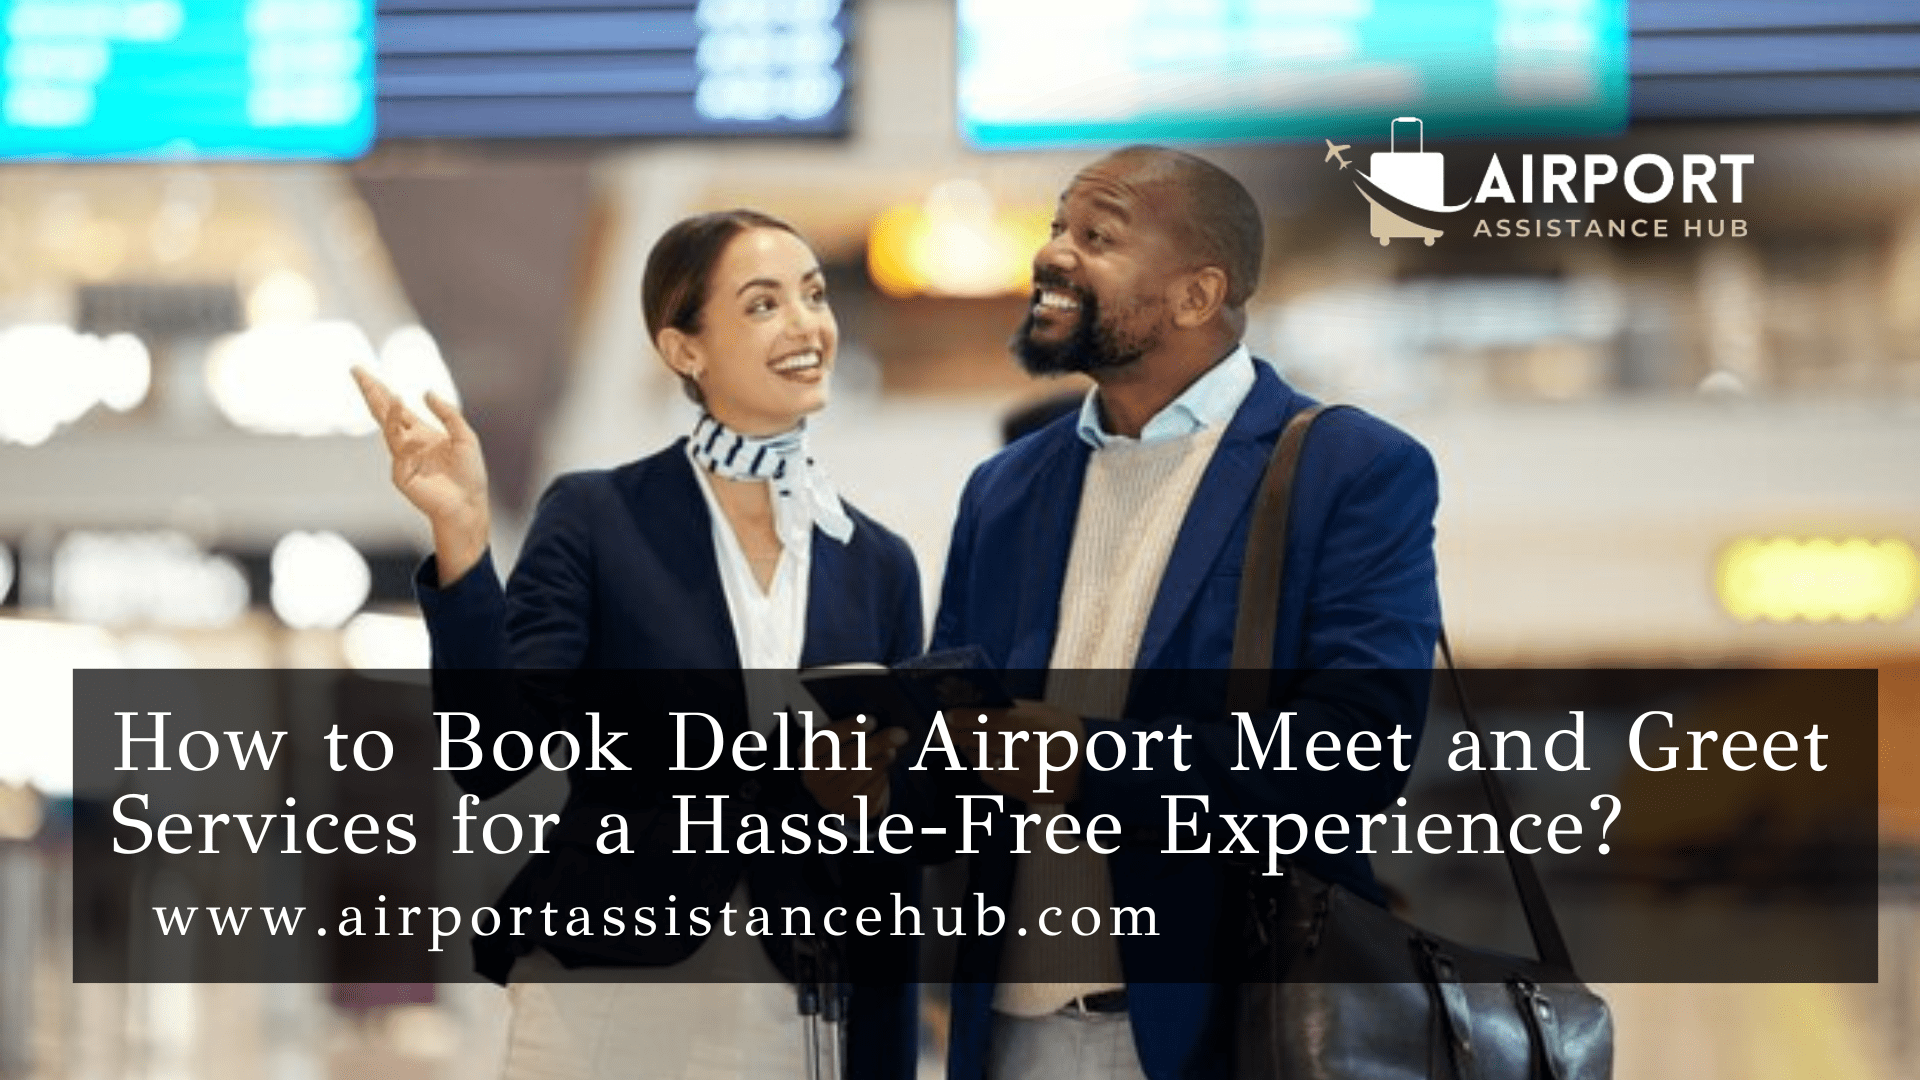 How to Book Delhi Airport Meet and Greet Services for a Hassle-Free Experience?